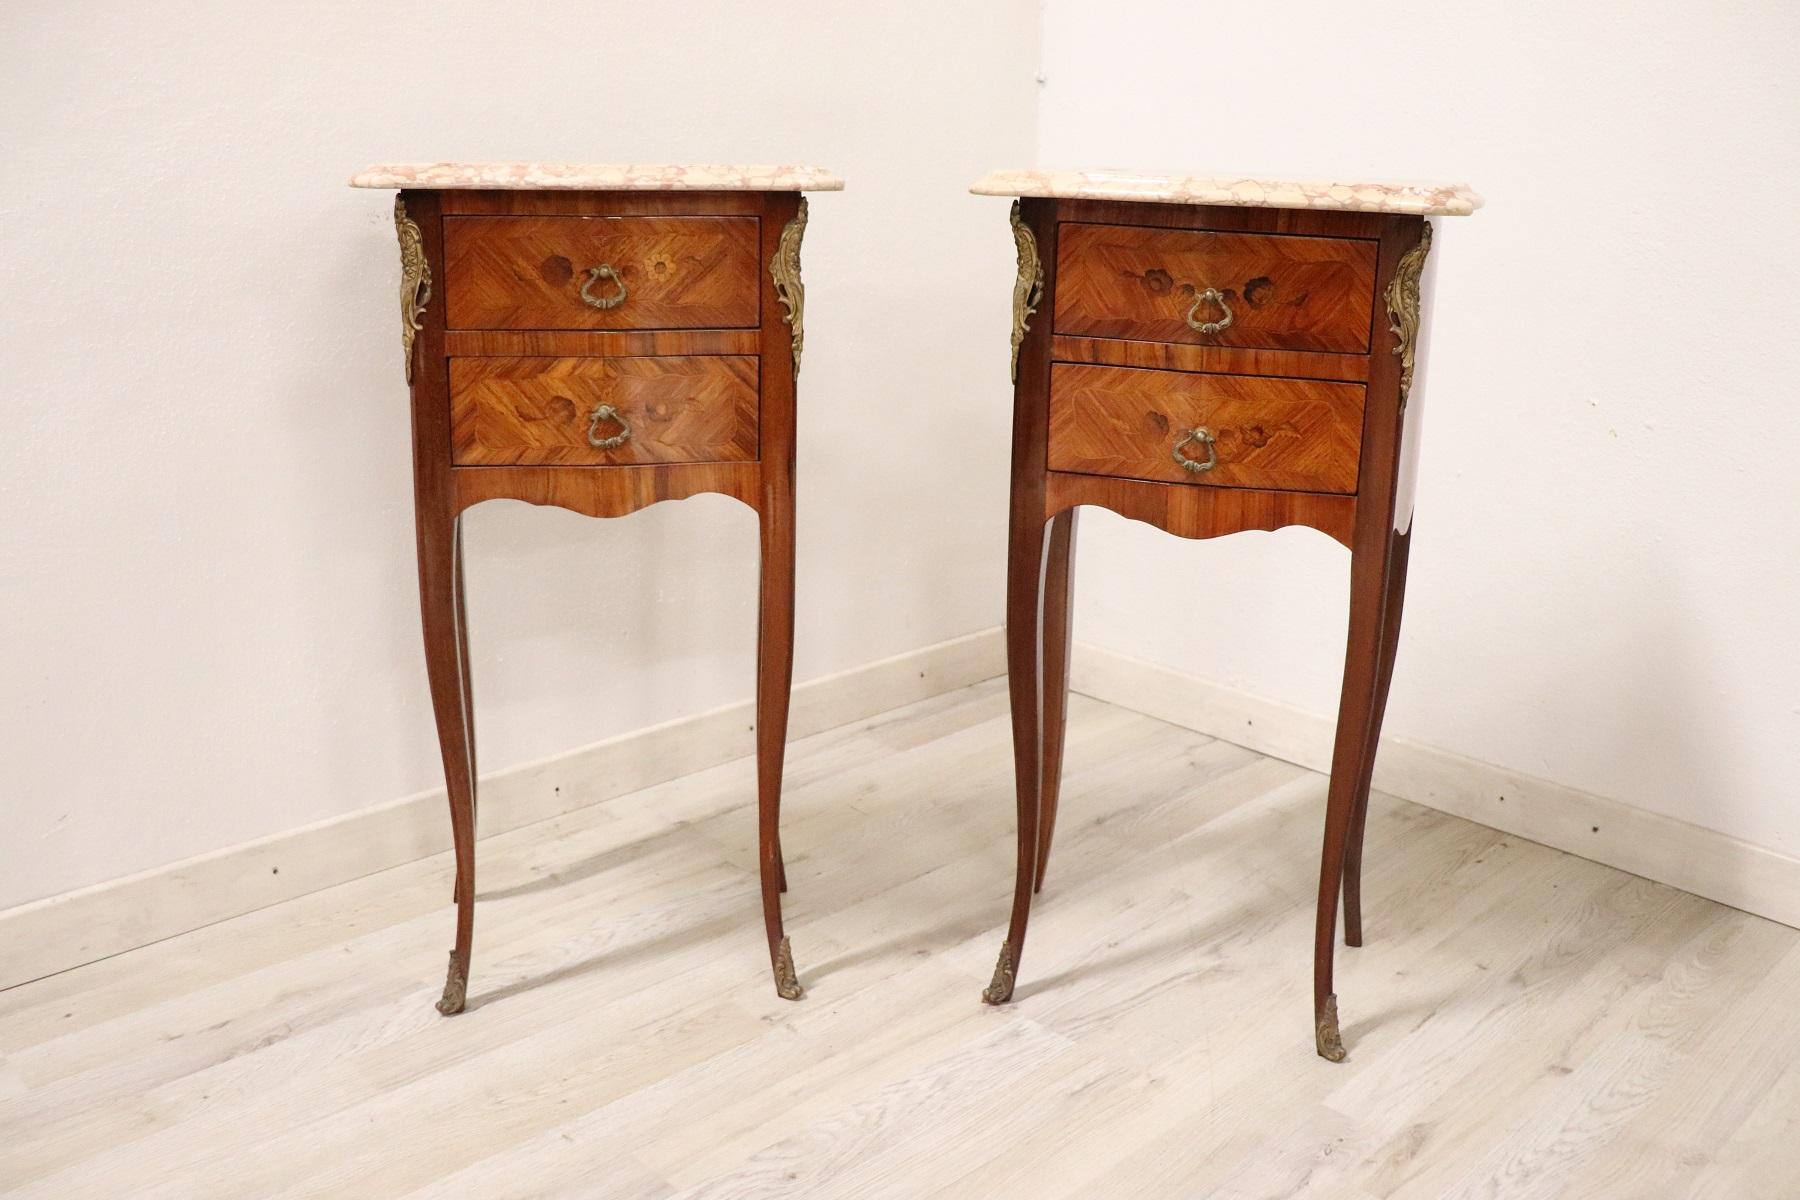 Louis XV style furniture richly adorned with gilded and chiselled bronze. The wood has a delicate floral taste inlay. The top is in precious pink marble. A pair of really elegant bedside tables, ideal in the bedroom but also used in other rooms of